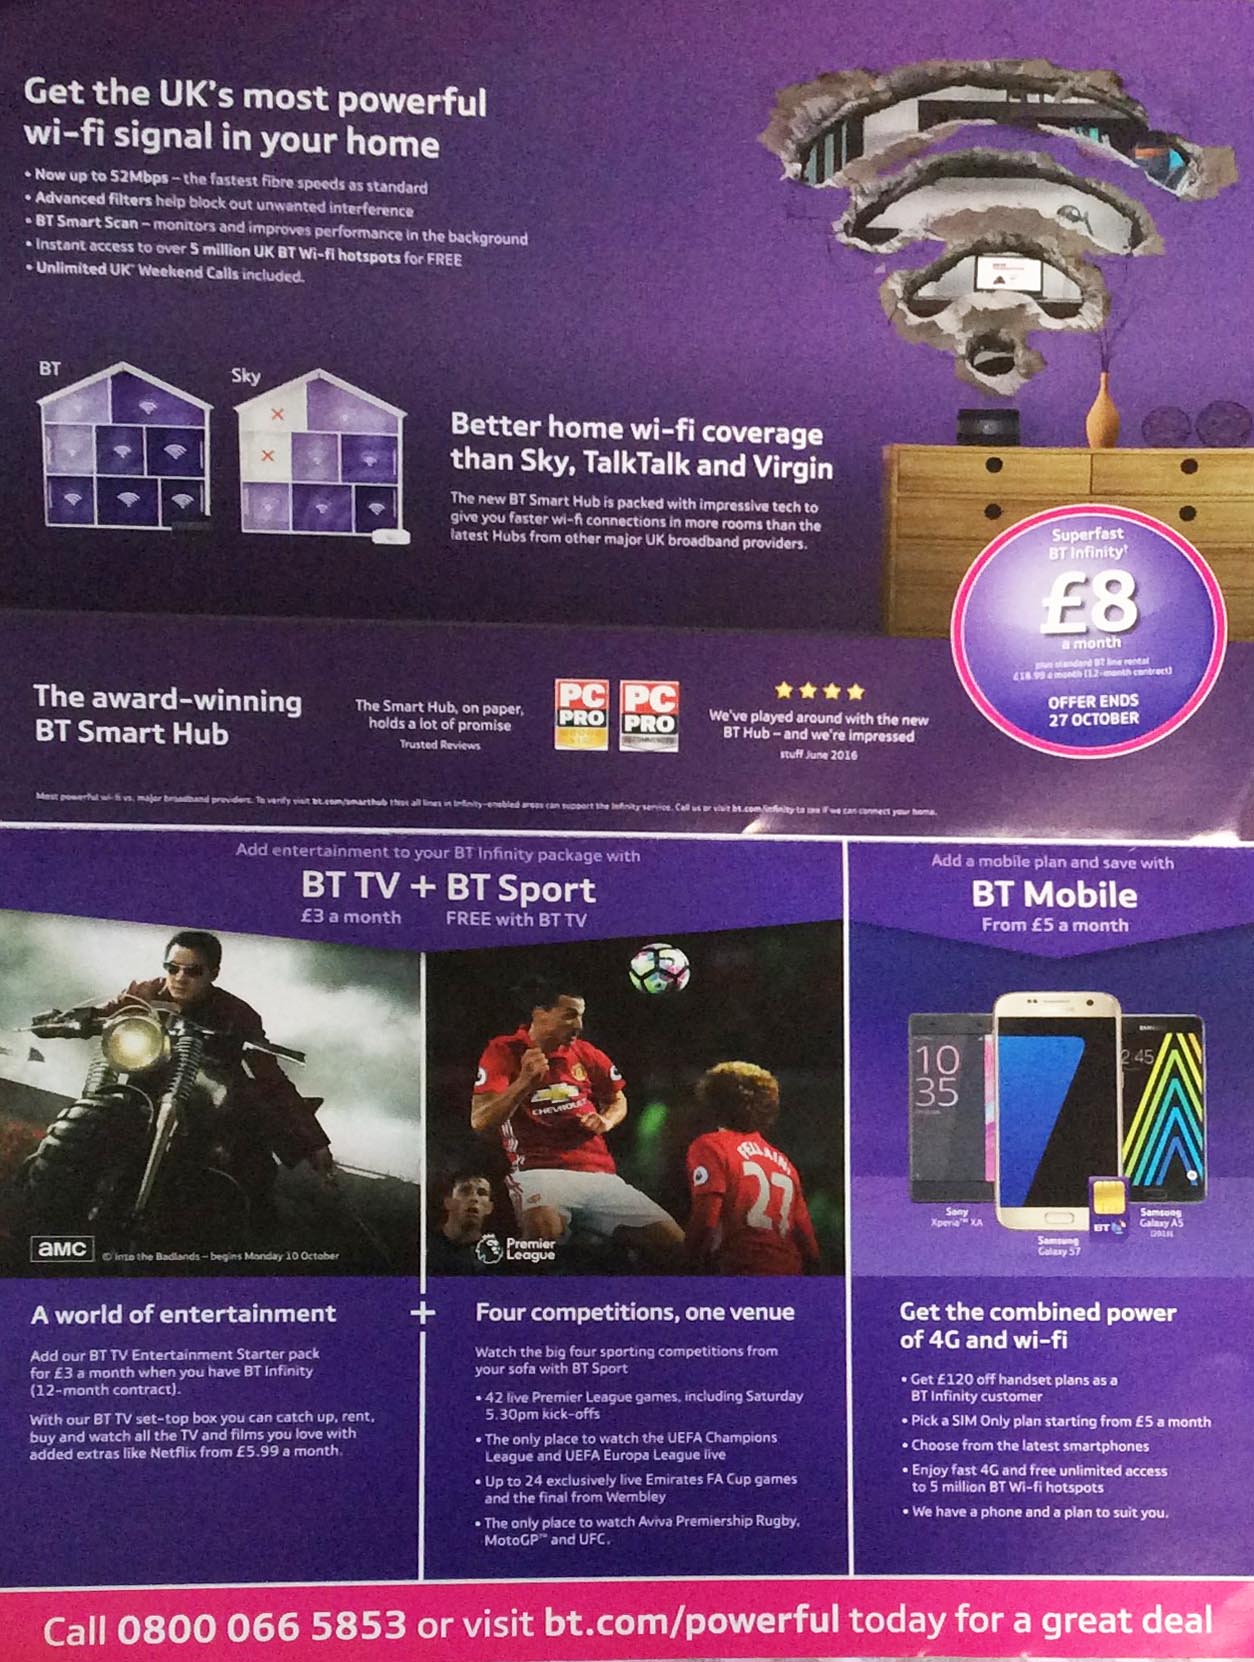 The Inside Pages of the 'BT' Flyer